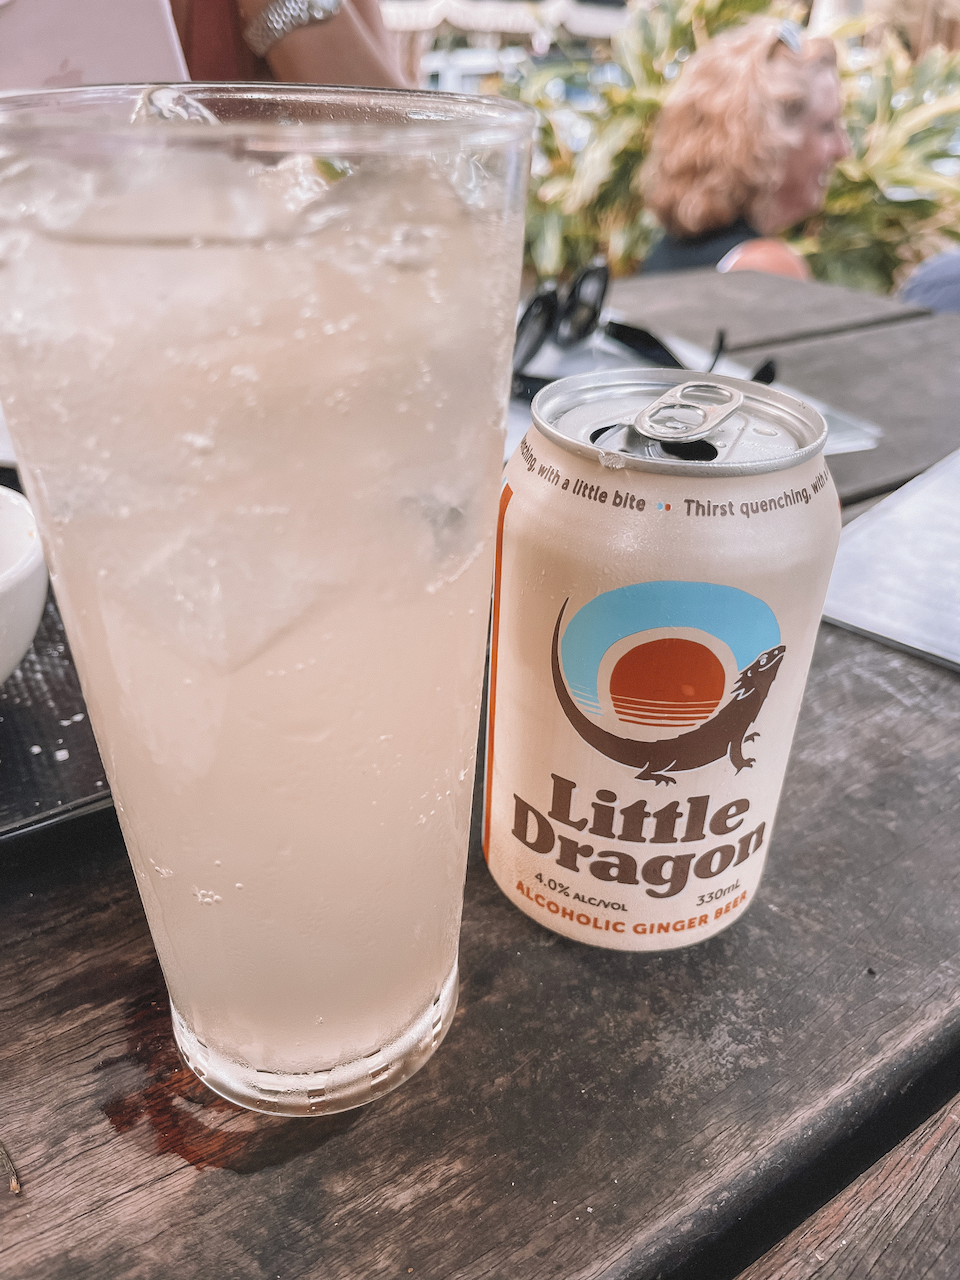 Little Dragons Ginger Beer at Treehouse - Byron Bay - New South Wales - Australia